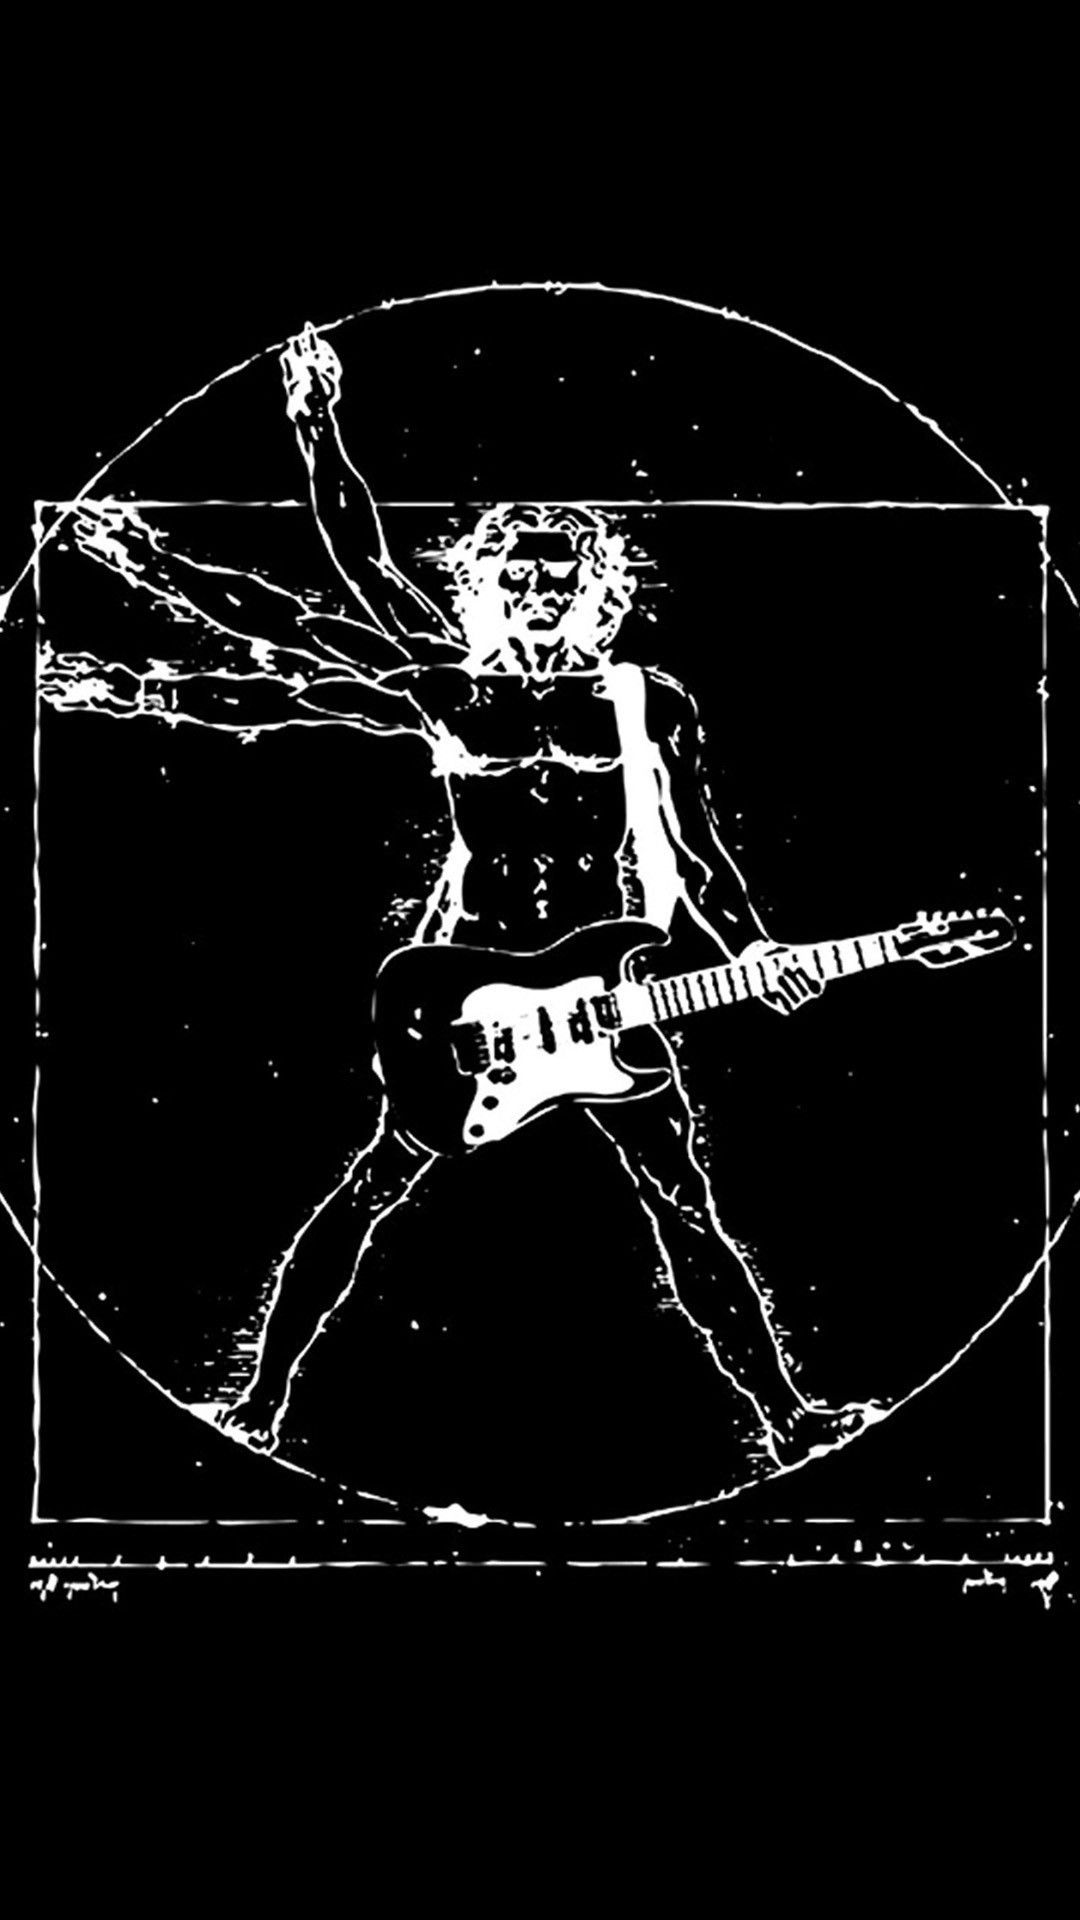 A black and white drawing of an electric guitar player - Rock